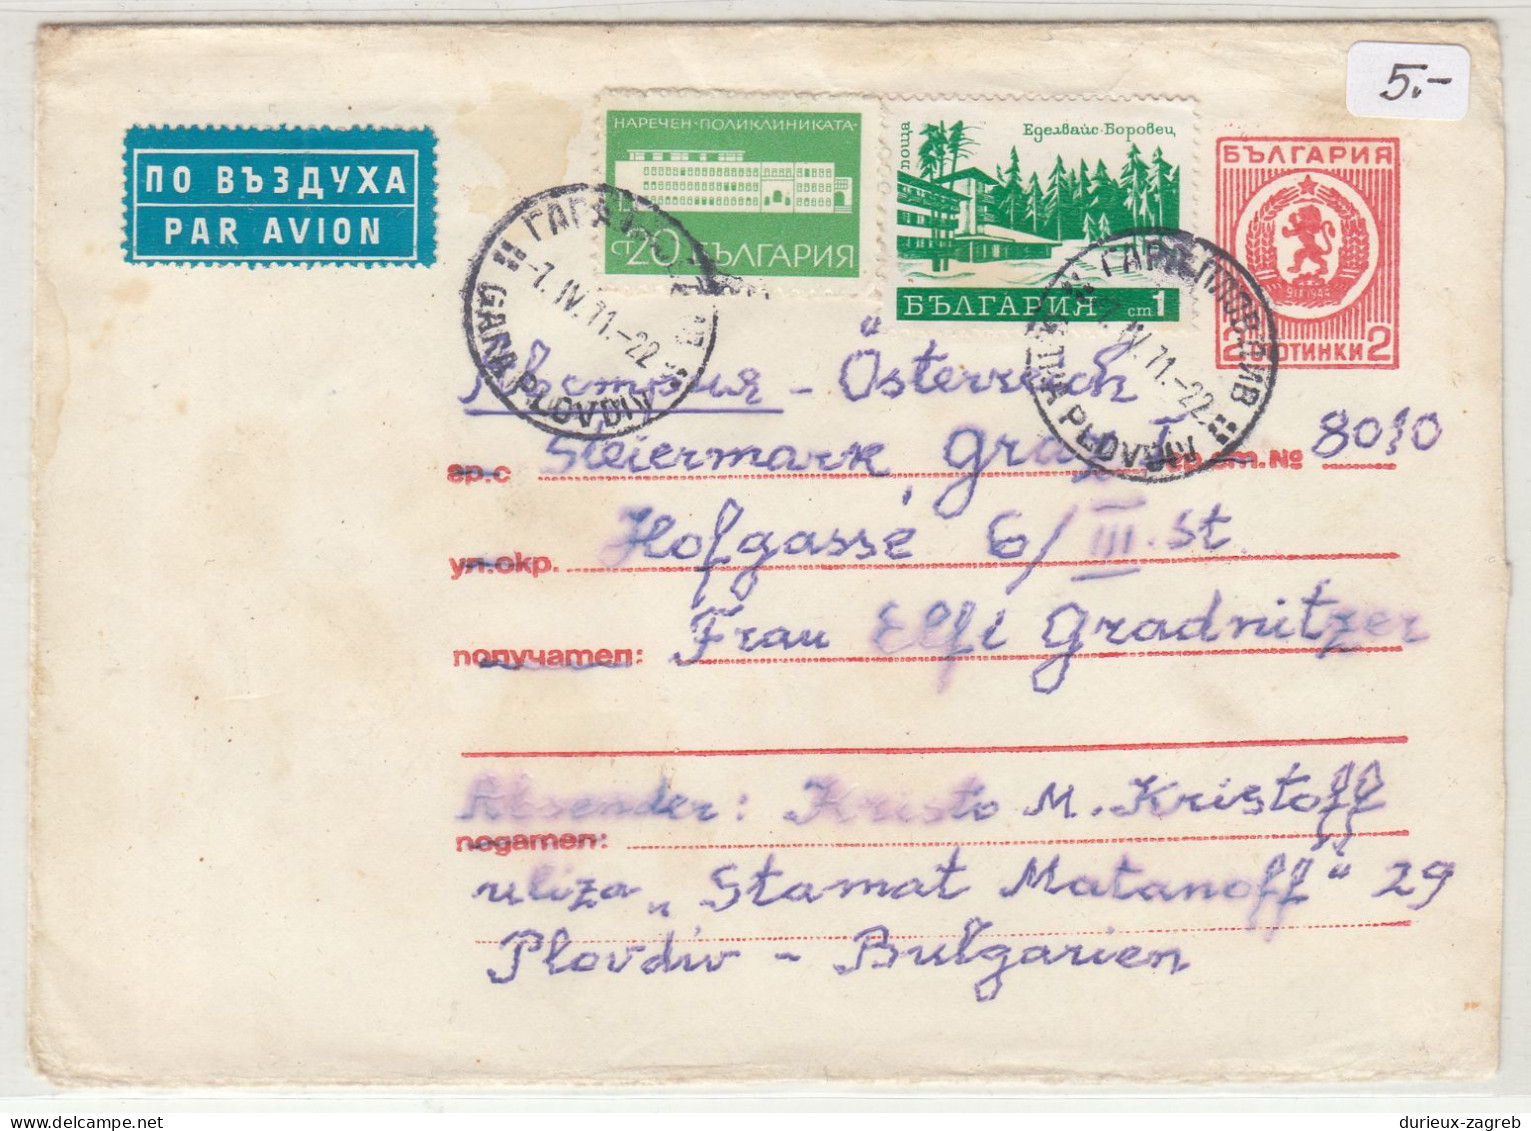 Bulgaria Postal Stationery Letter Cover Posted Air Mail 1971 Plovdiv To Graz - Uprated B240401 - Enveloppes